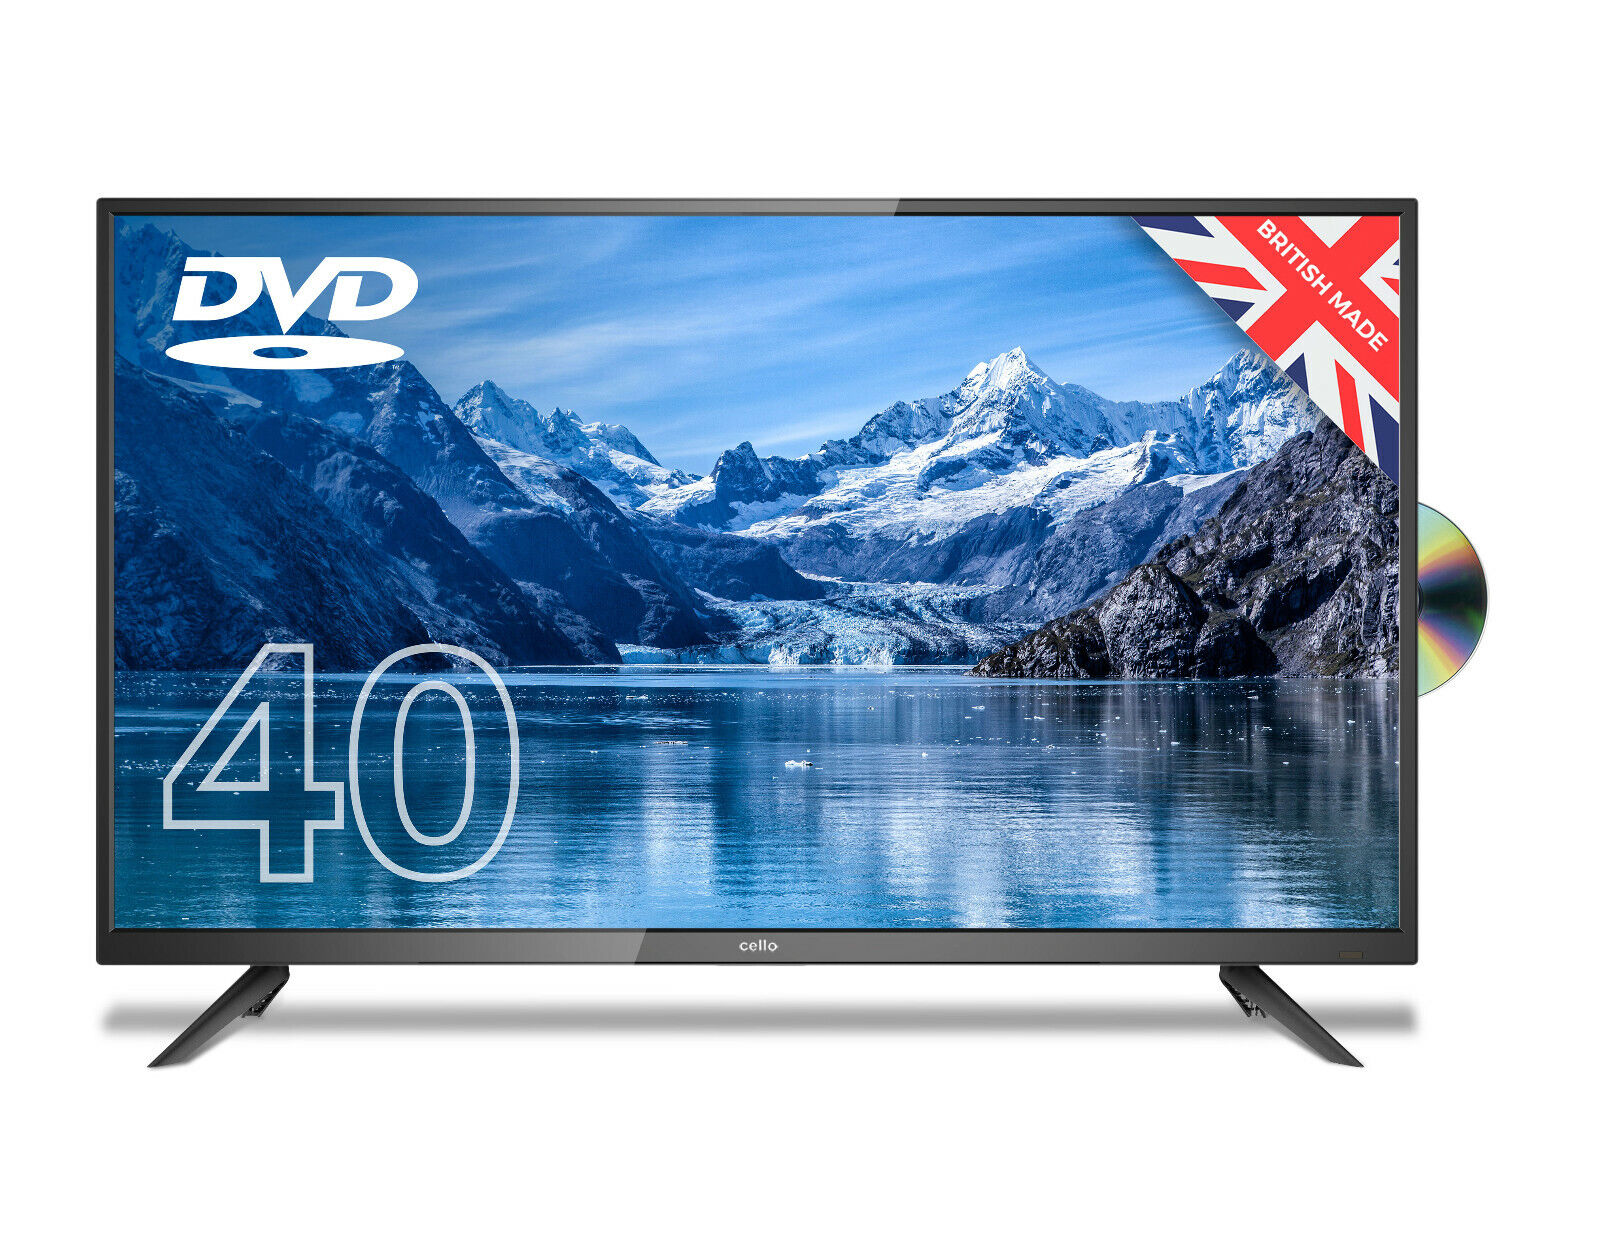 CELLO 40 inch LED TV BUILT IN DVD PLAYER FULL HD 1080P FREEVIEW HD 3 x HDMI,USB